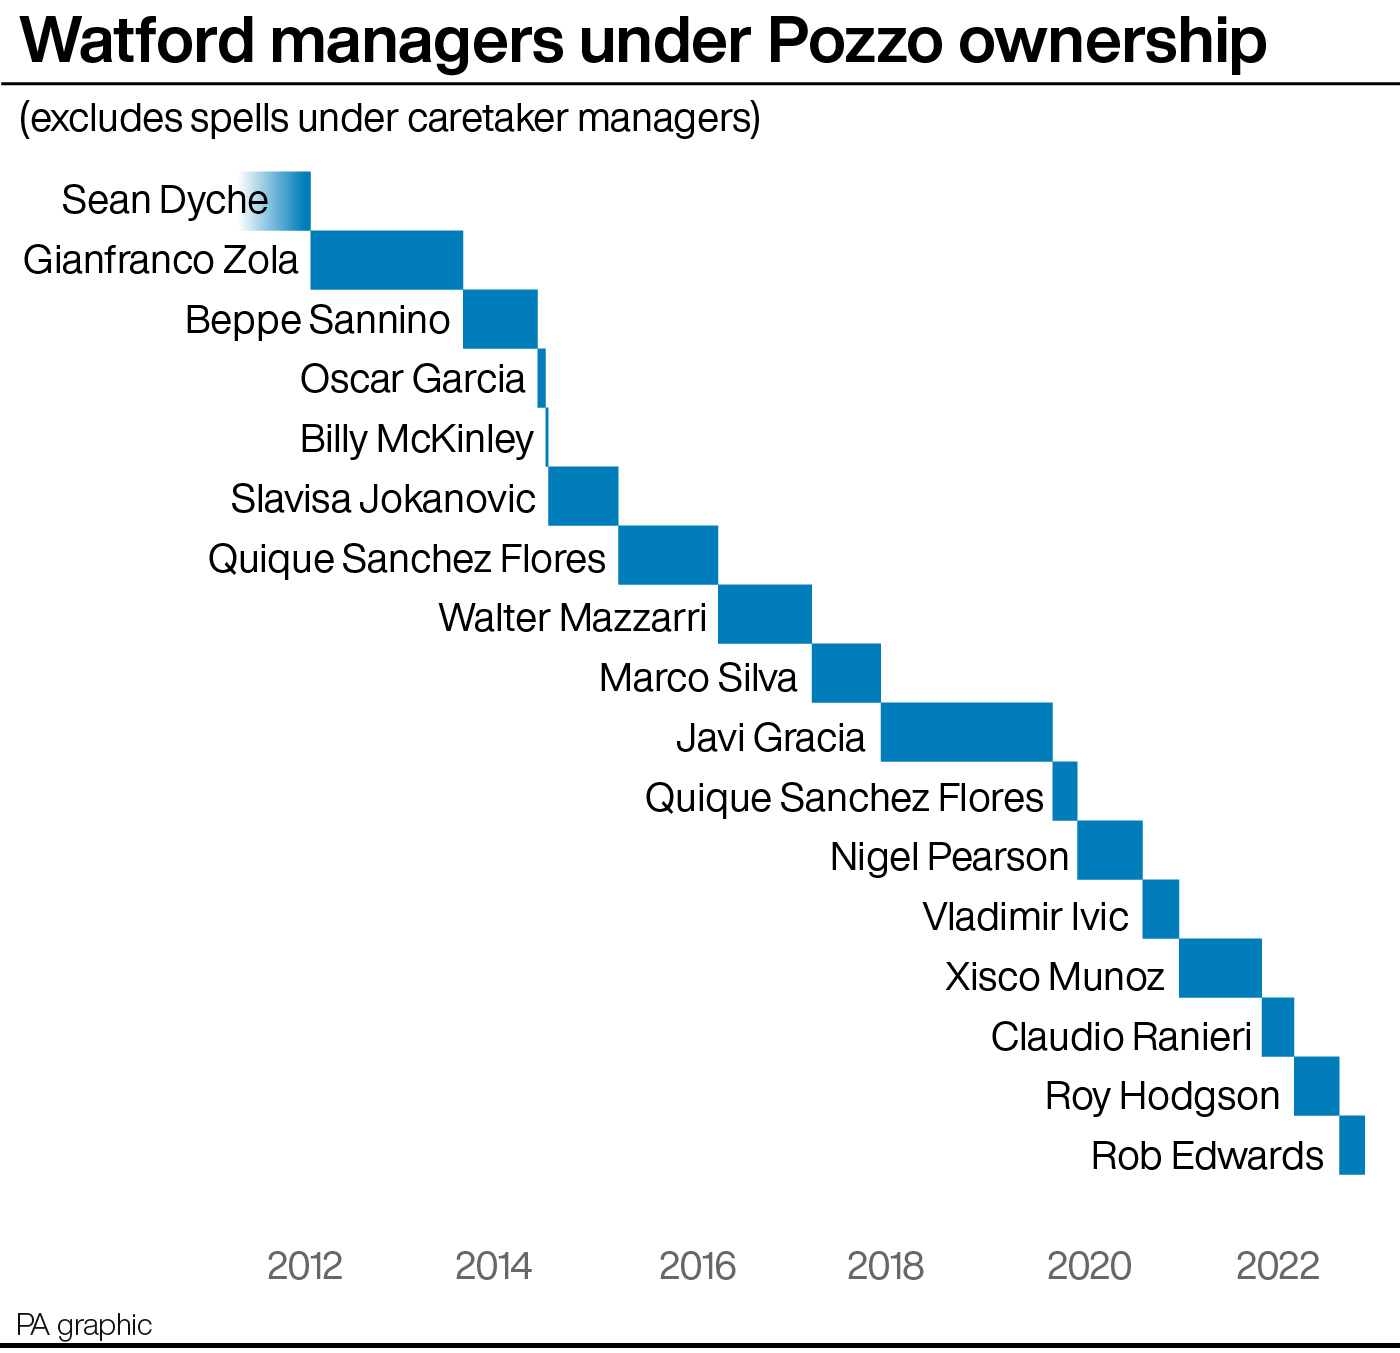 Watford managers under Pozzo ownership